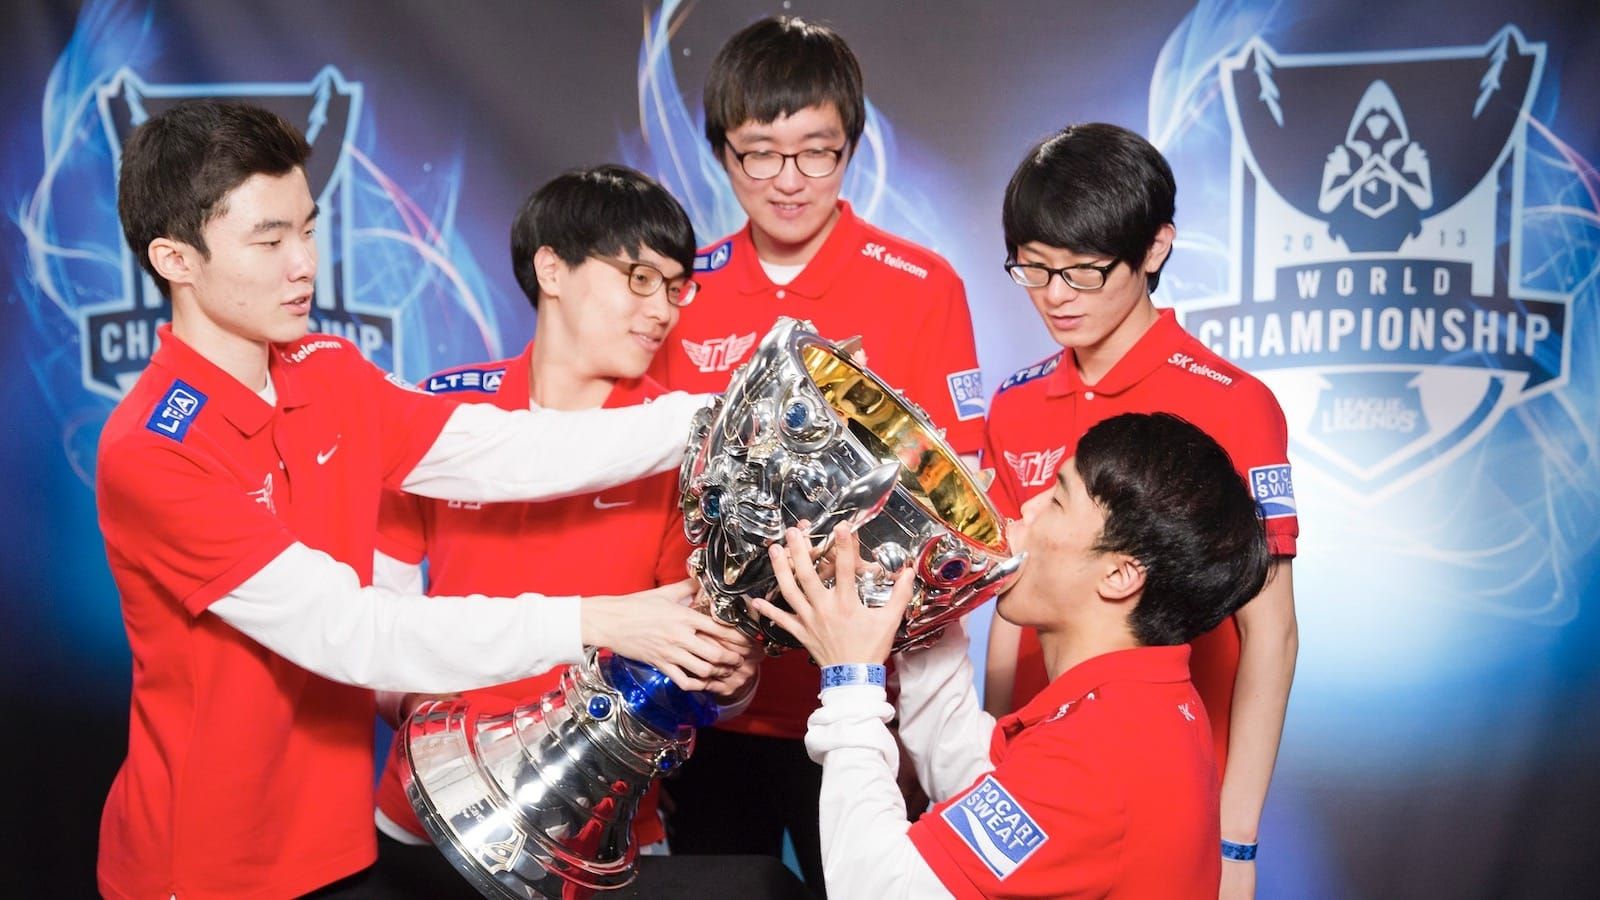 Faker's T1 wins League of Legends global championship - KED Global